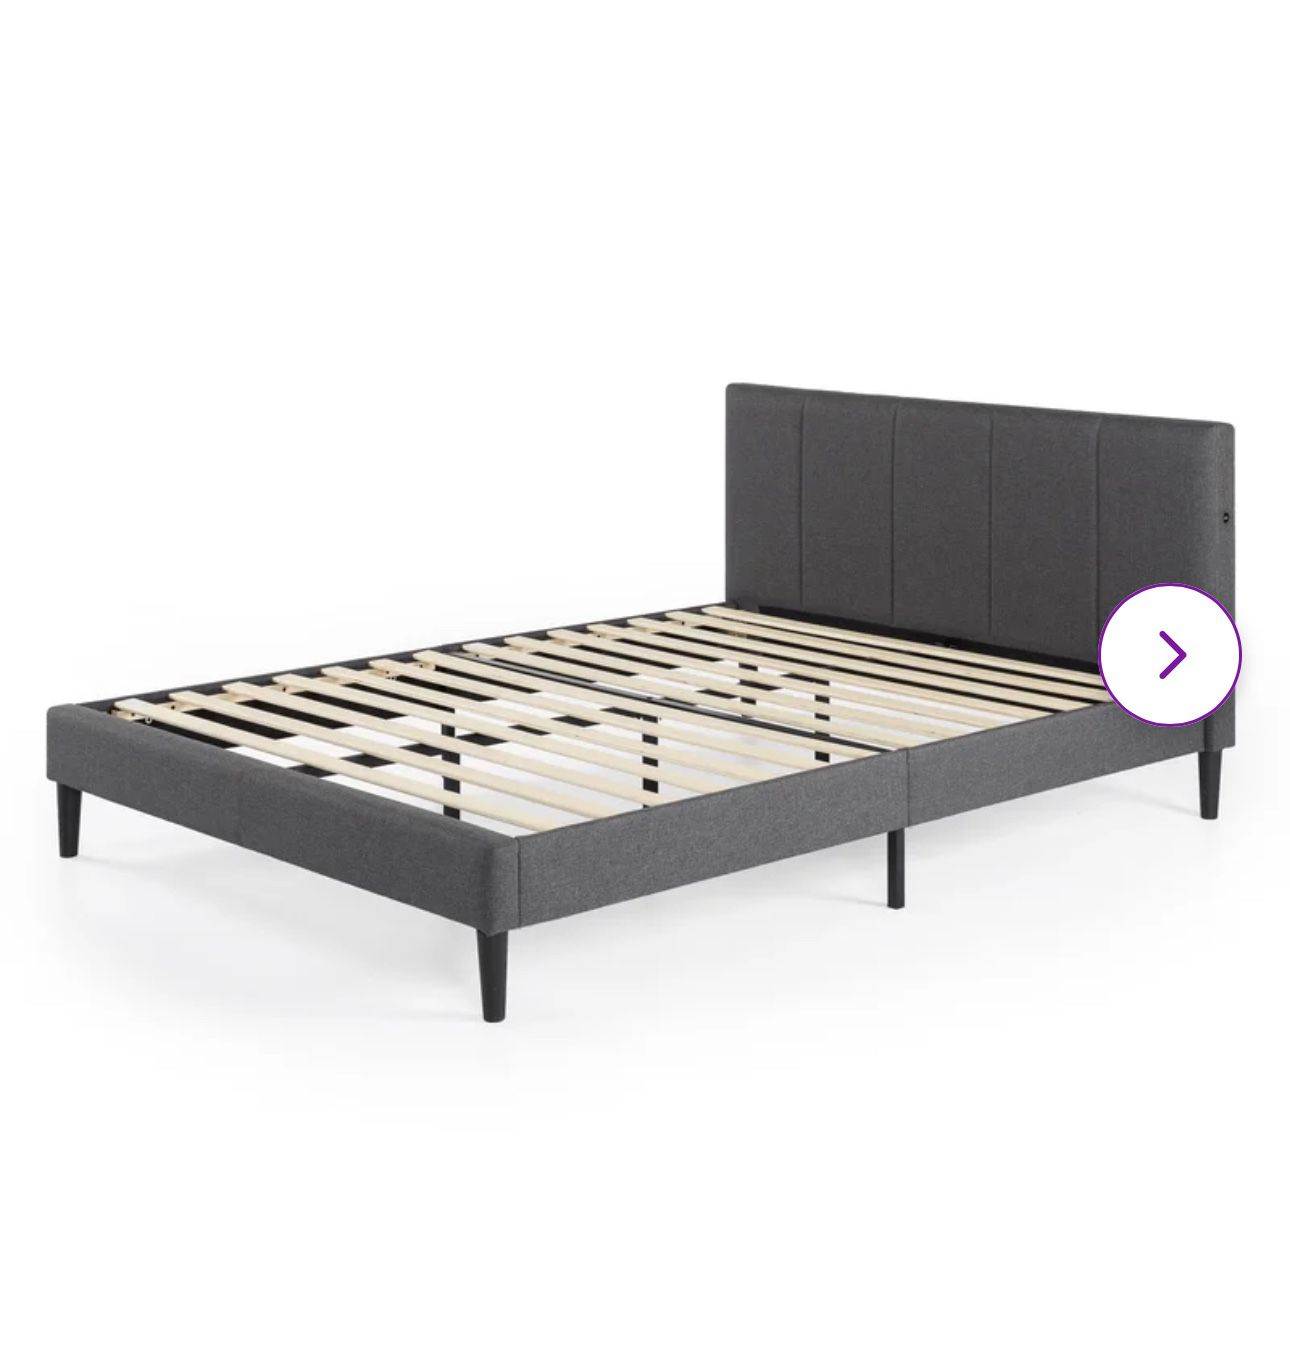 Yaheetech Full Upholstered Platform Bed Frame, Mattress Foundation with Height Adjustable Tufted Headboard, Wooden Slat Support, No Box Spring Needed,